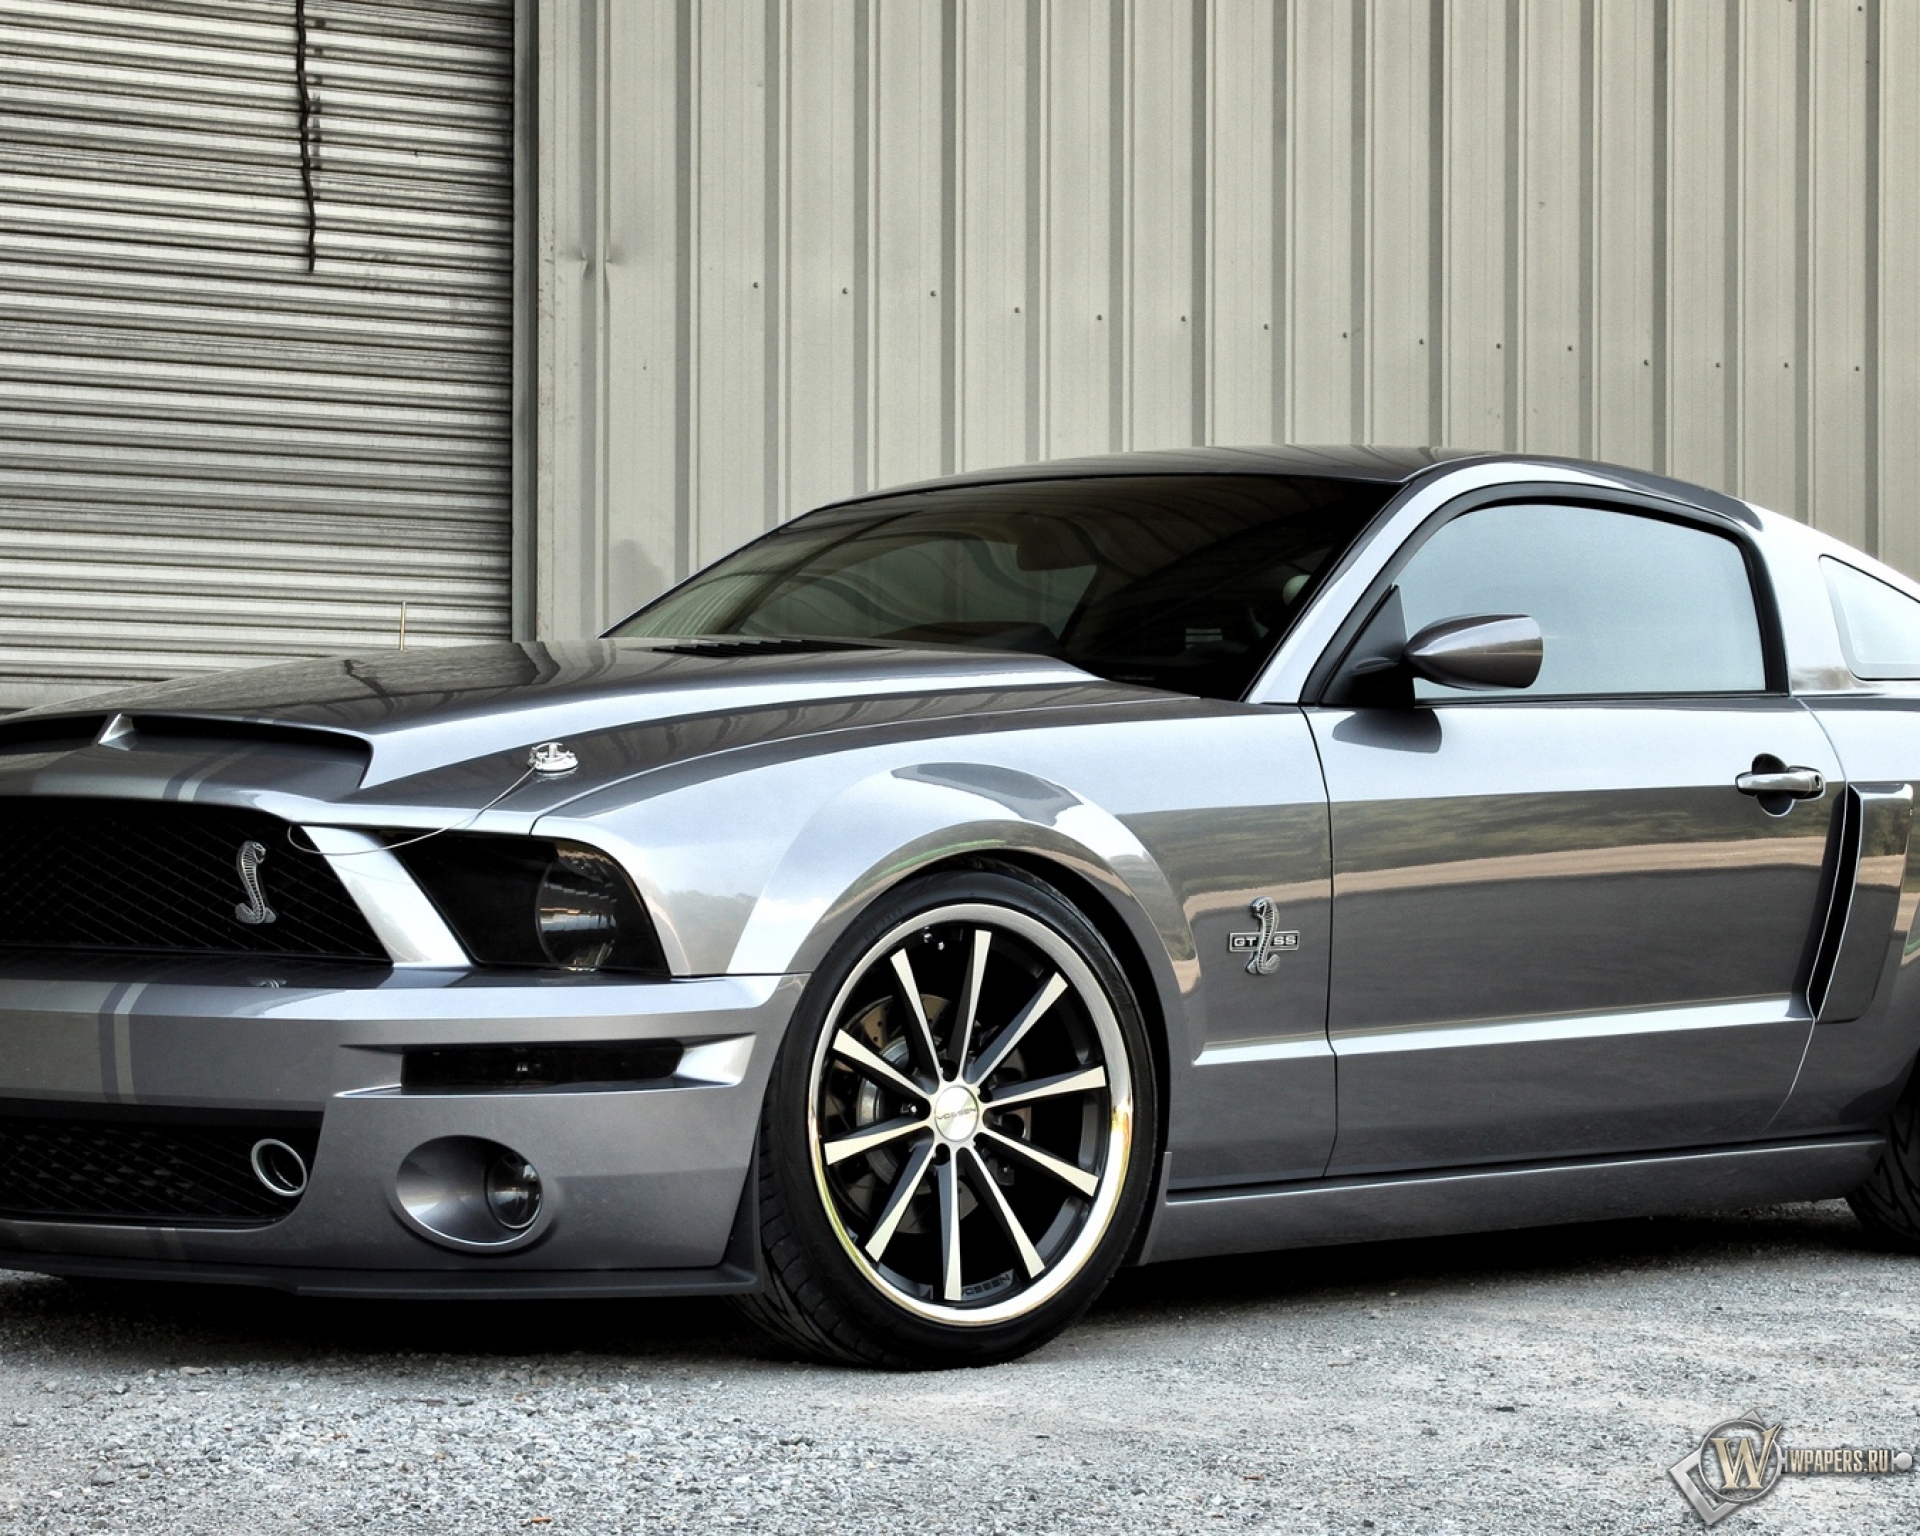 Ford Mustang Shelby GT500 1920x1536